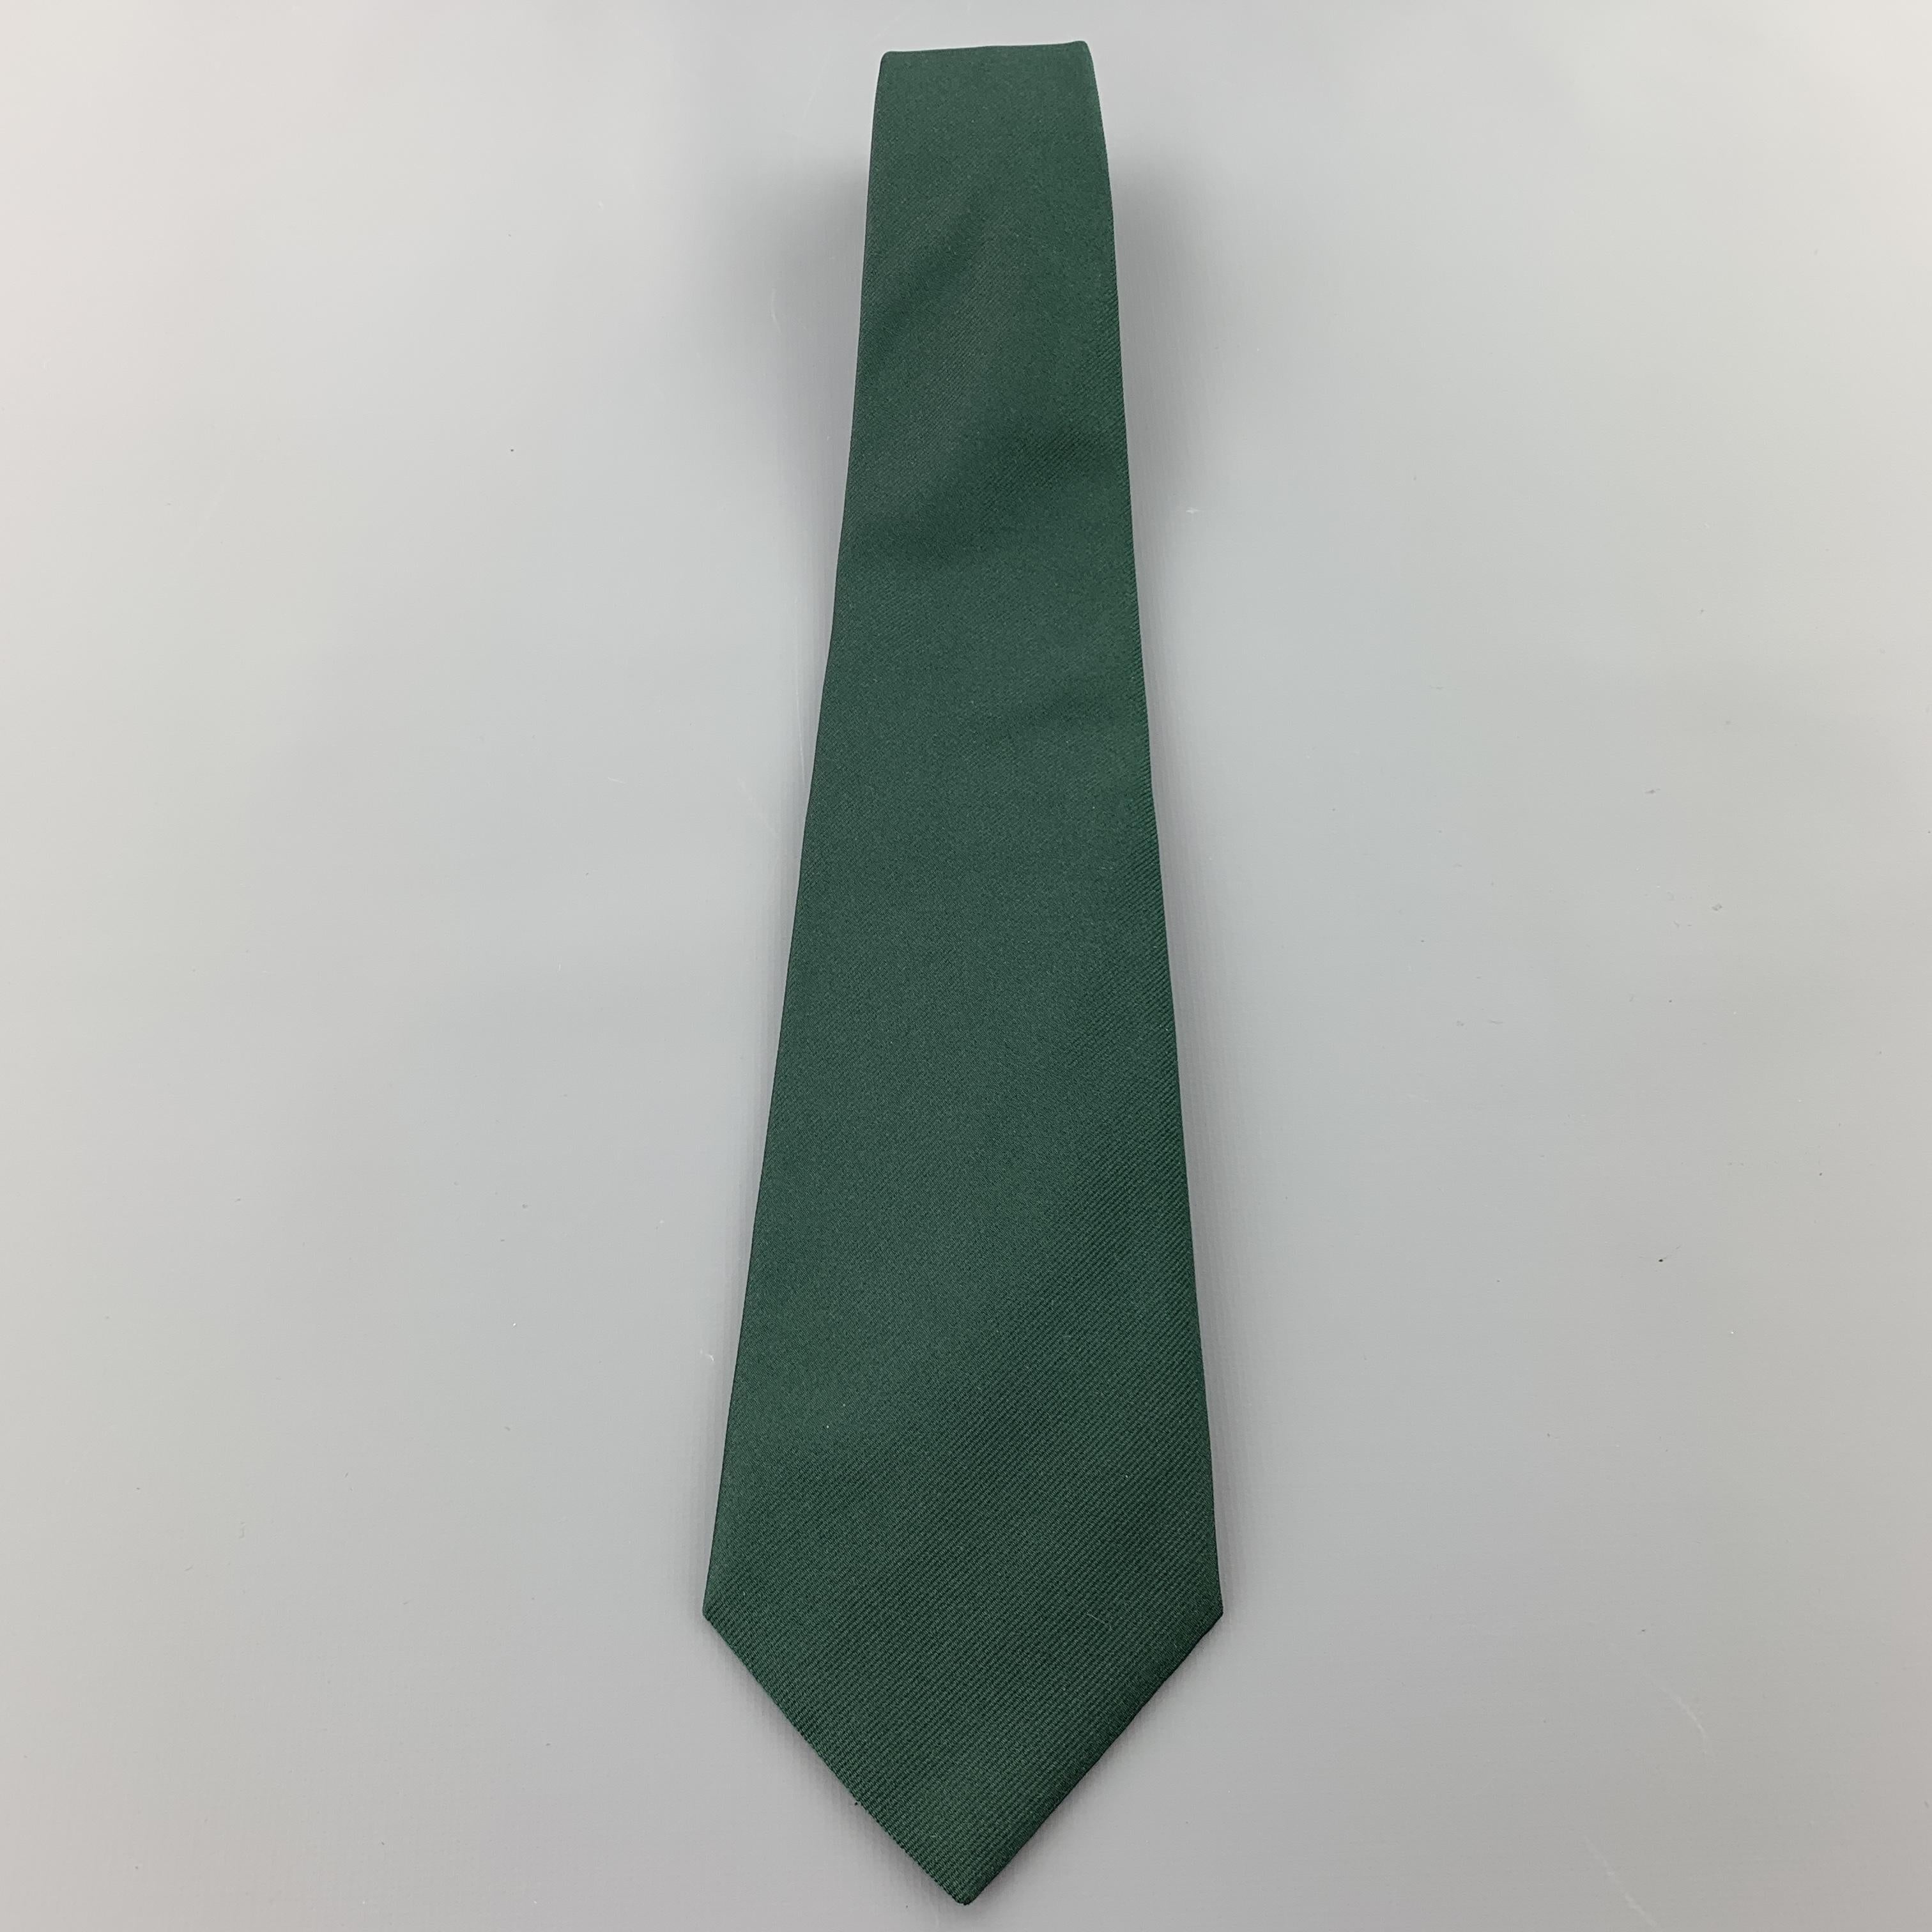 POLO RALPH LAUREN necktie comes in forest green silk twill with navy liner. Hand made in USA.

Excellent Pre-Owned Condition.

Width: 4 in.  